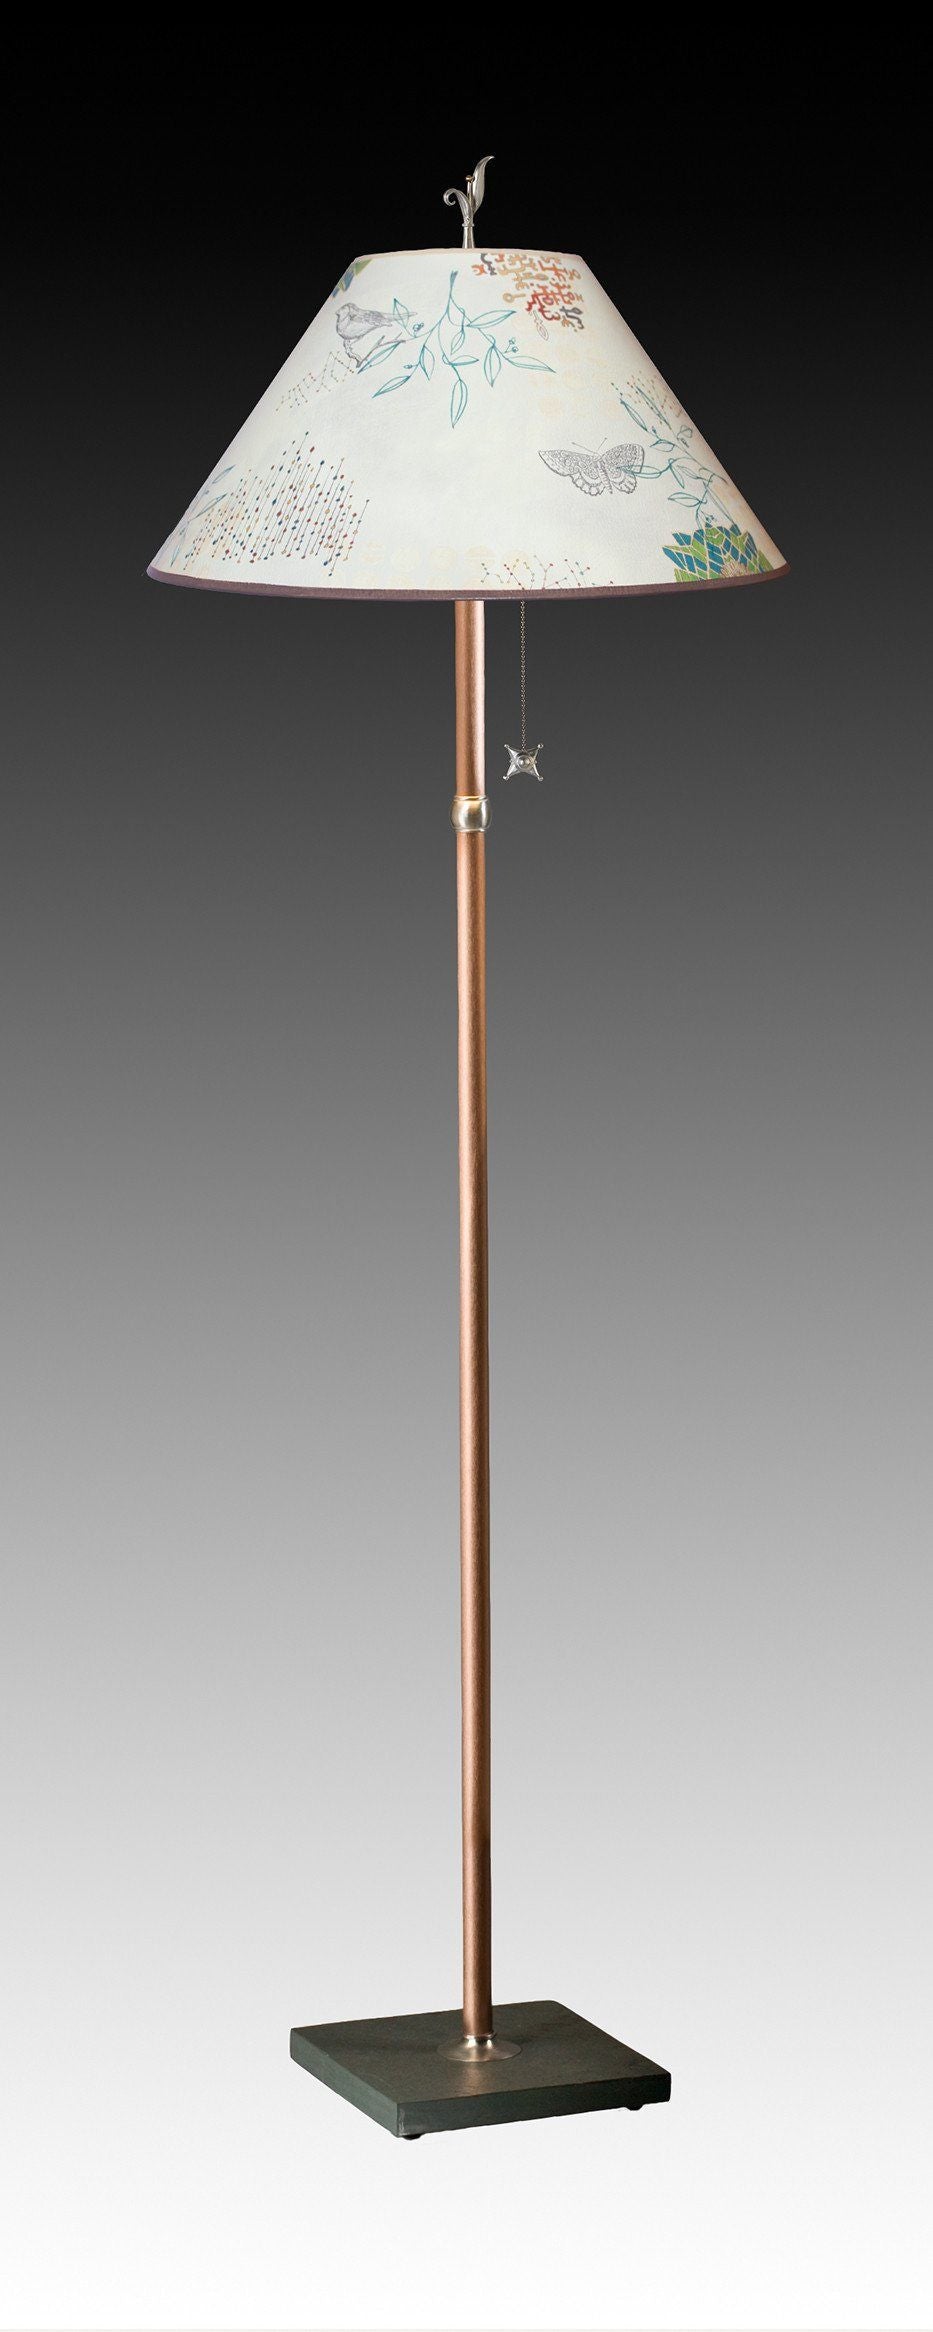 Copper Floor Lamp with Large Conical Shade in Ecru Journey